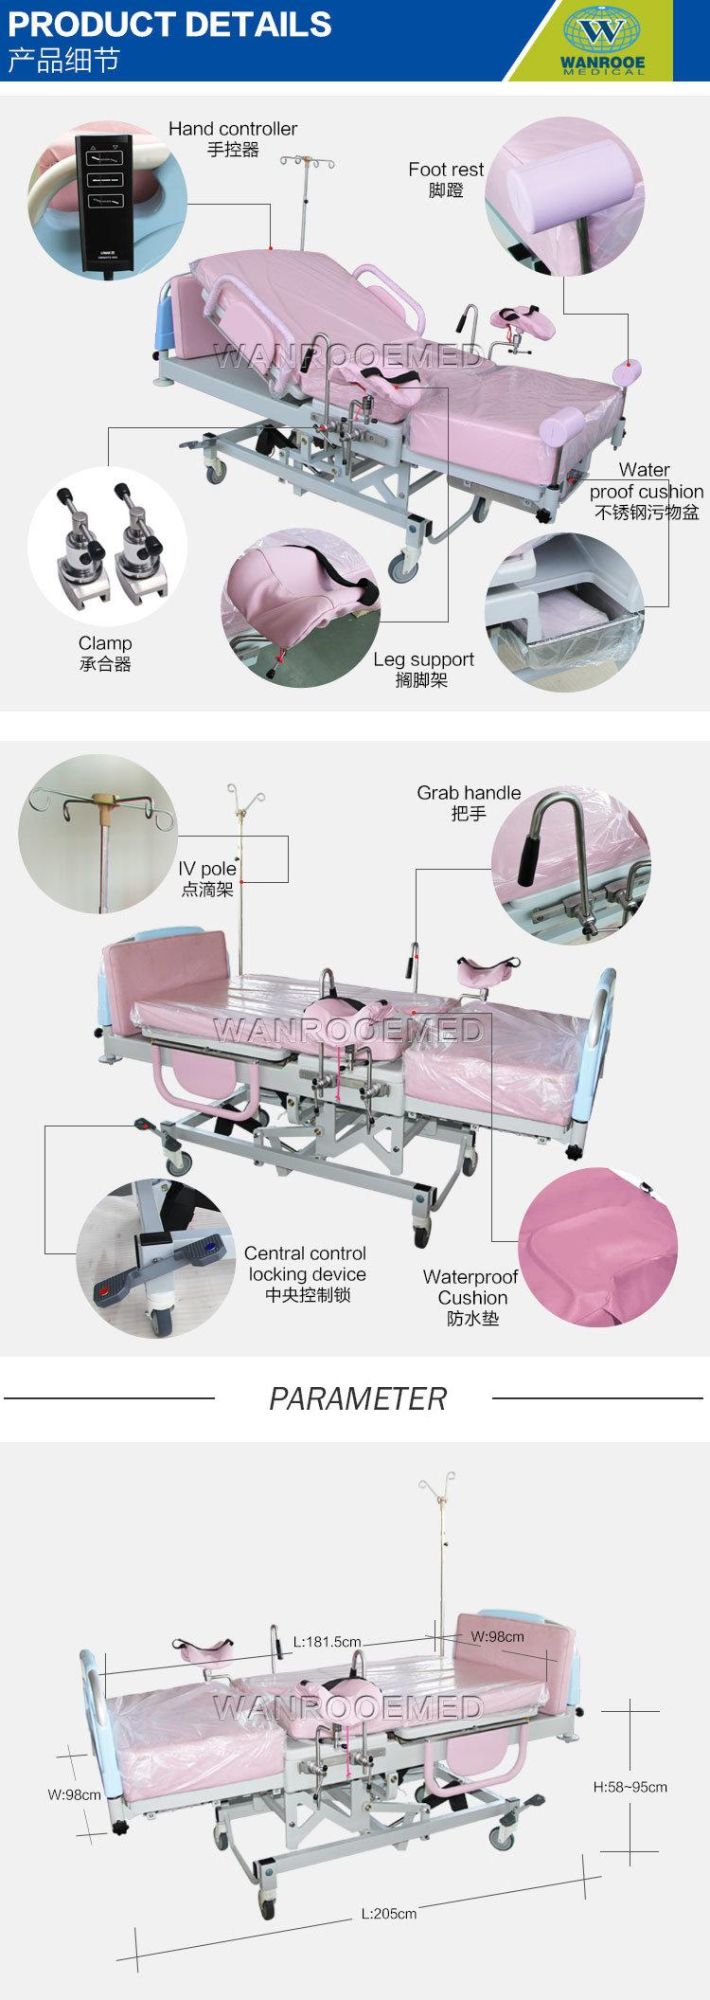 Aldr100b Hospital Gynecology Operation Bed Electric Delivery Bed